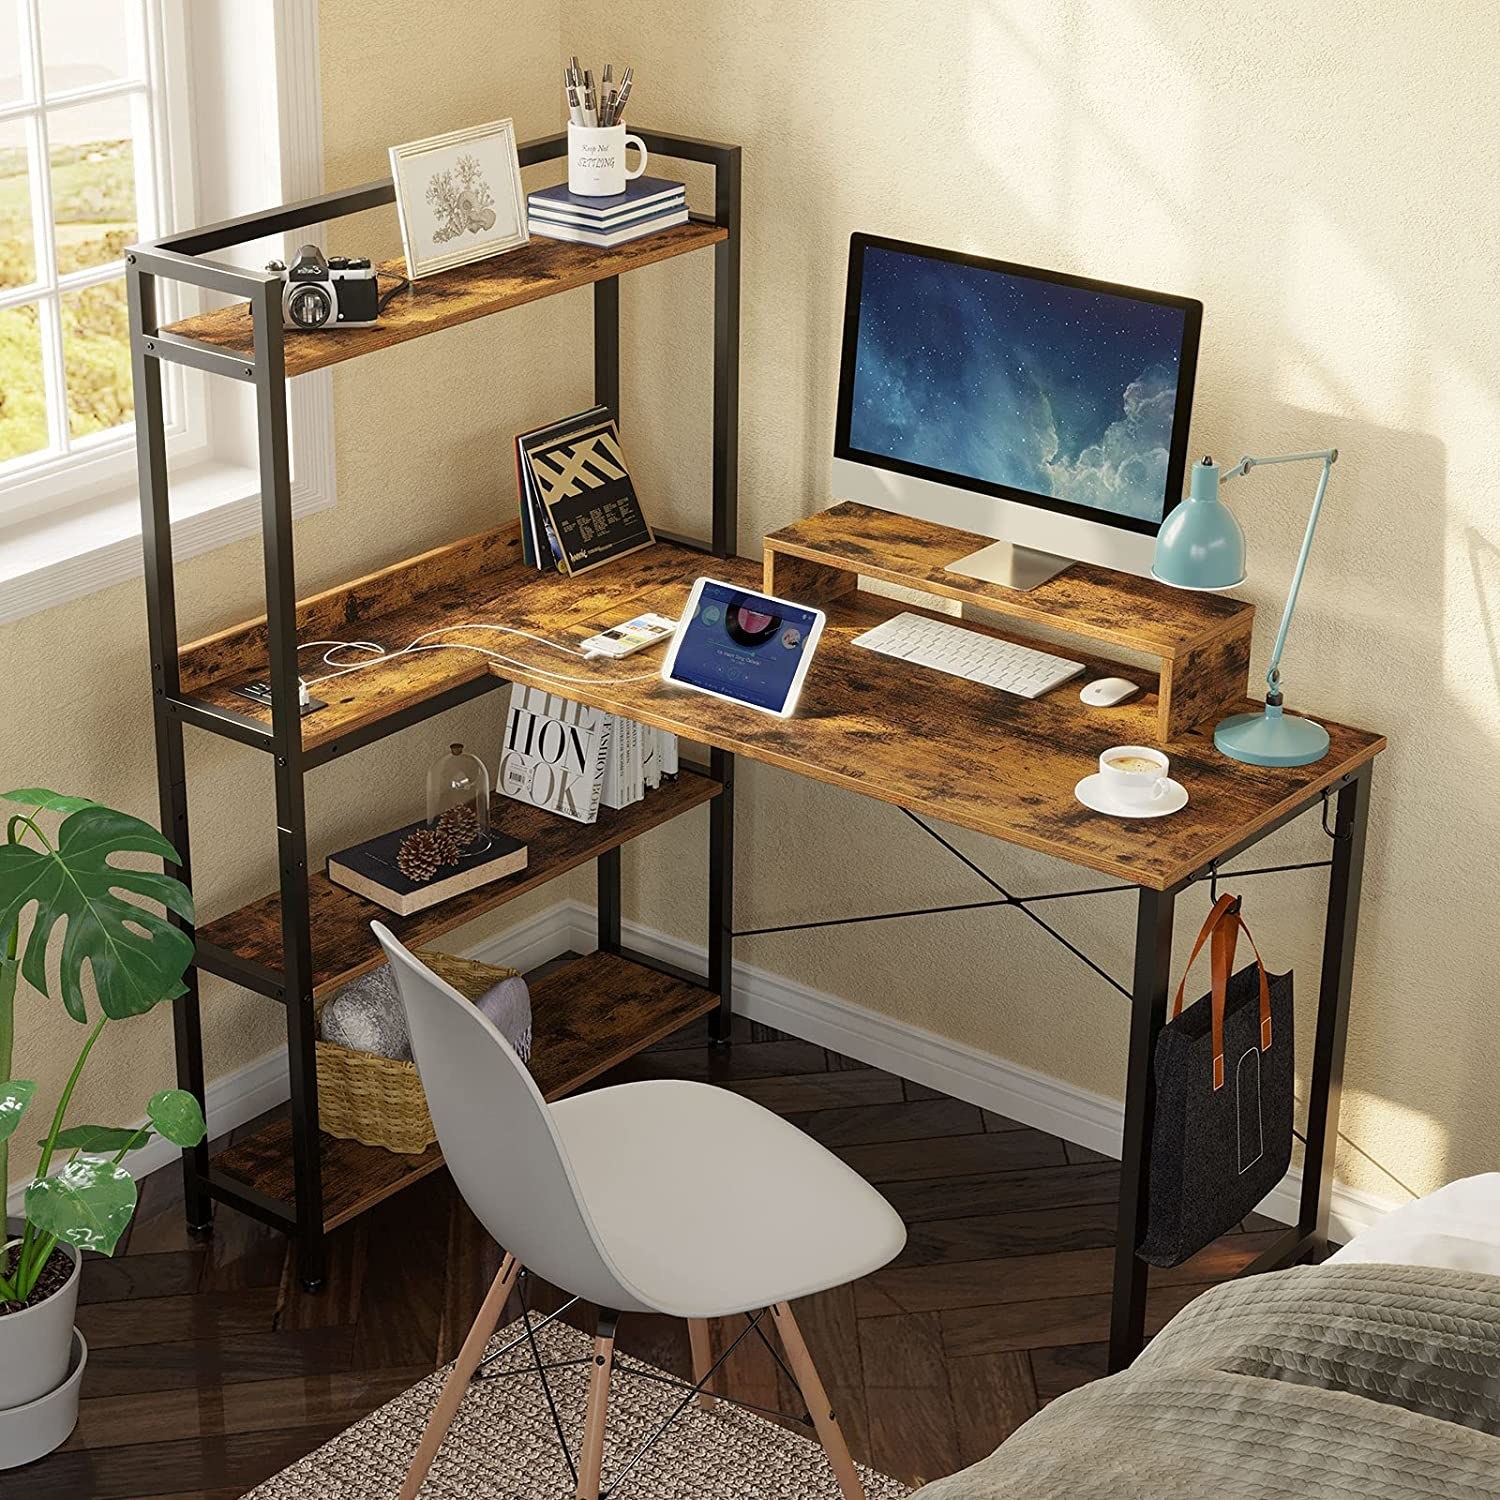 The desk in a bedroom with a bunch of gadgets on it